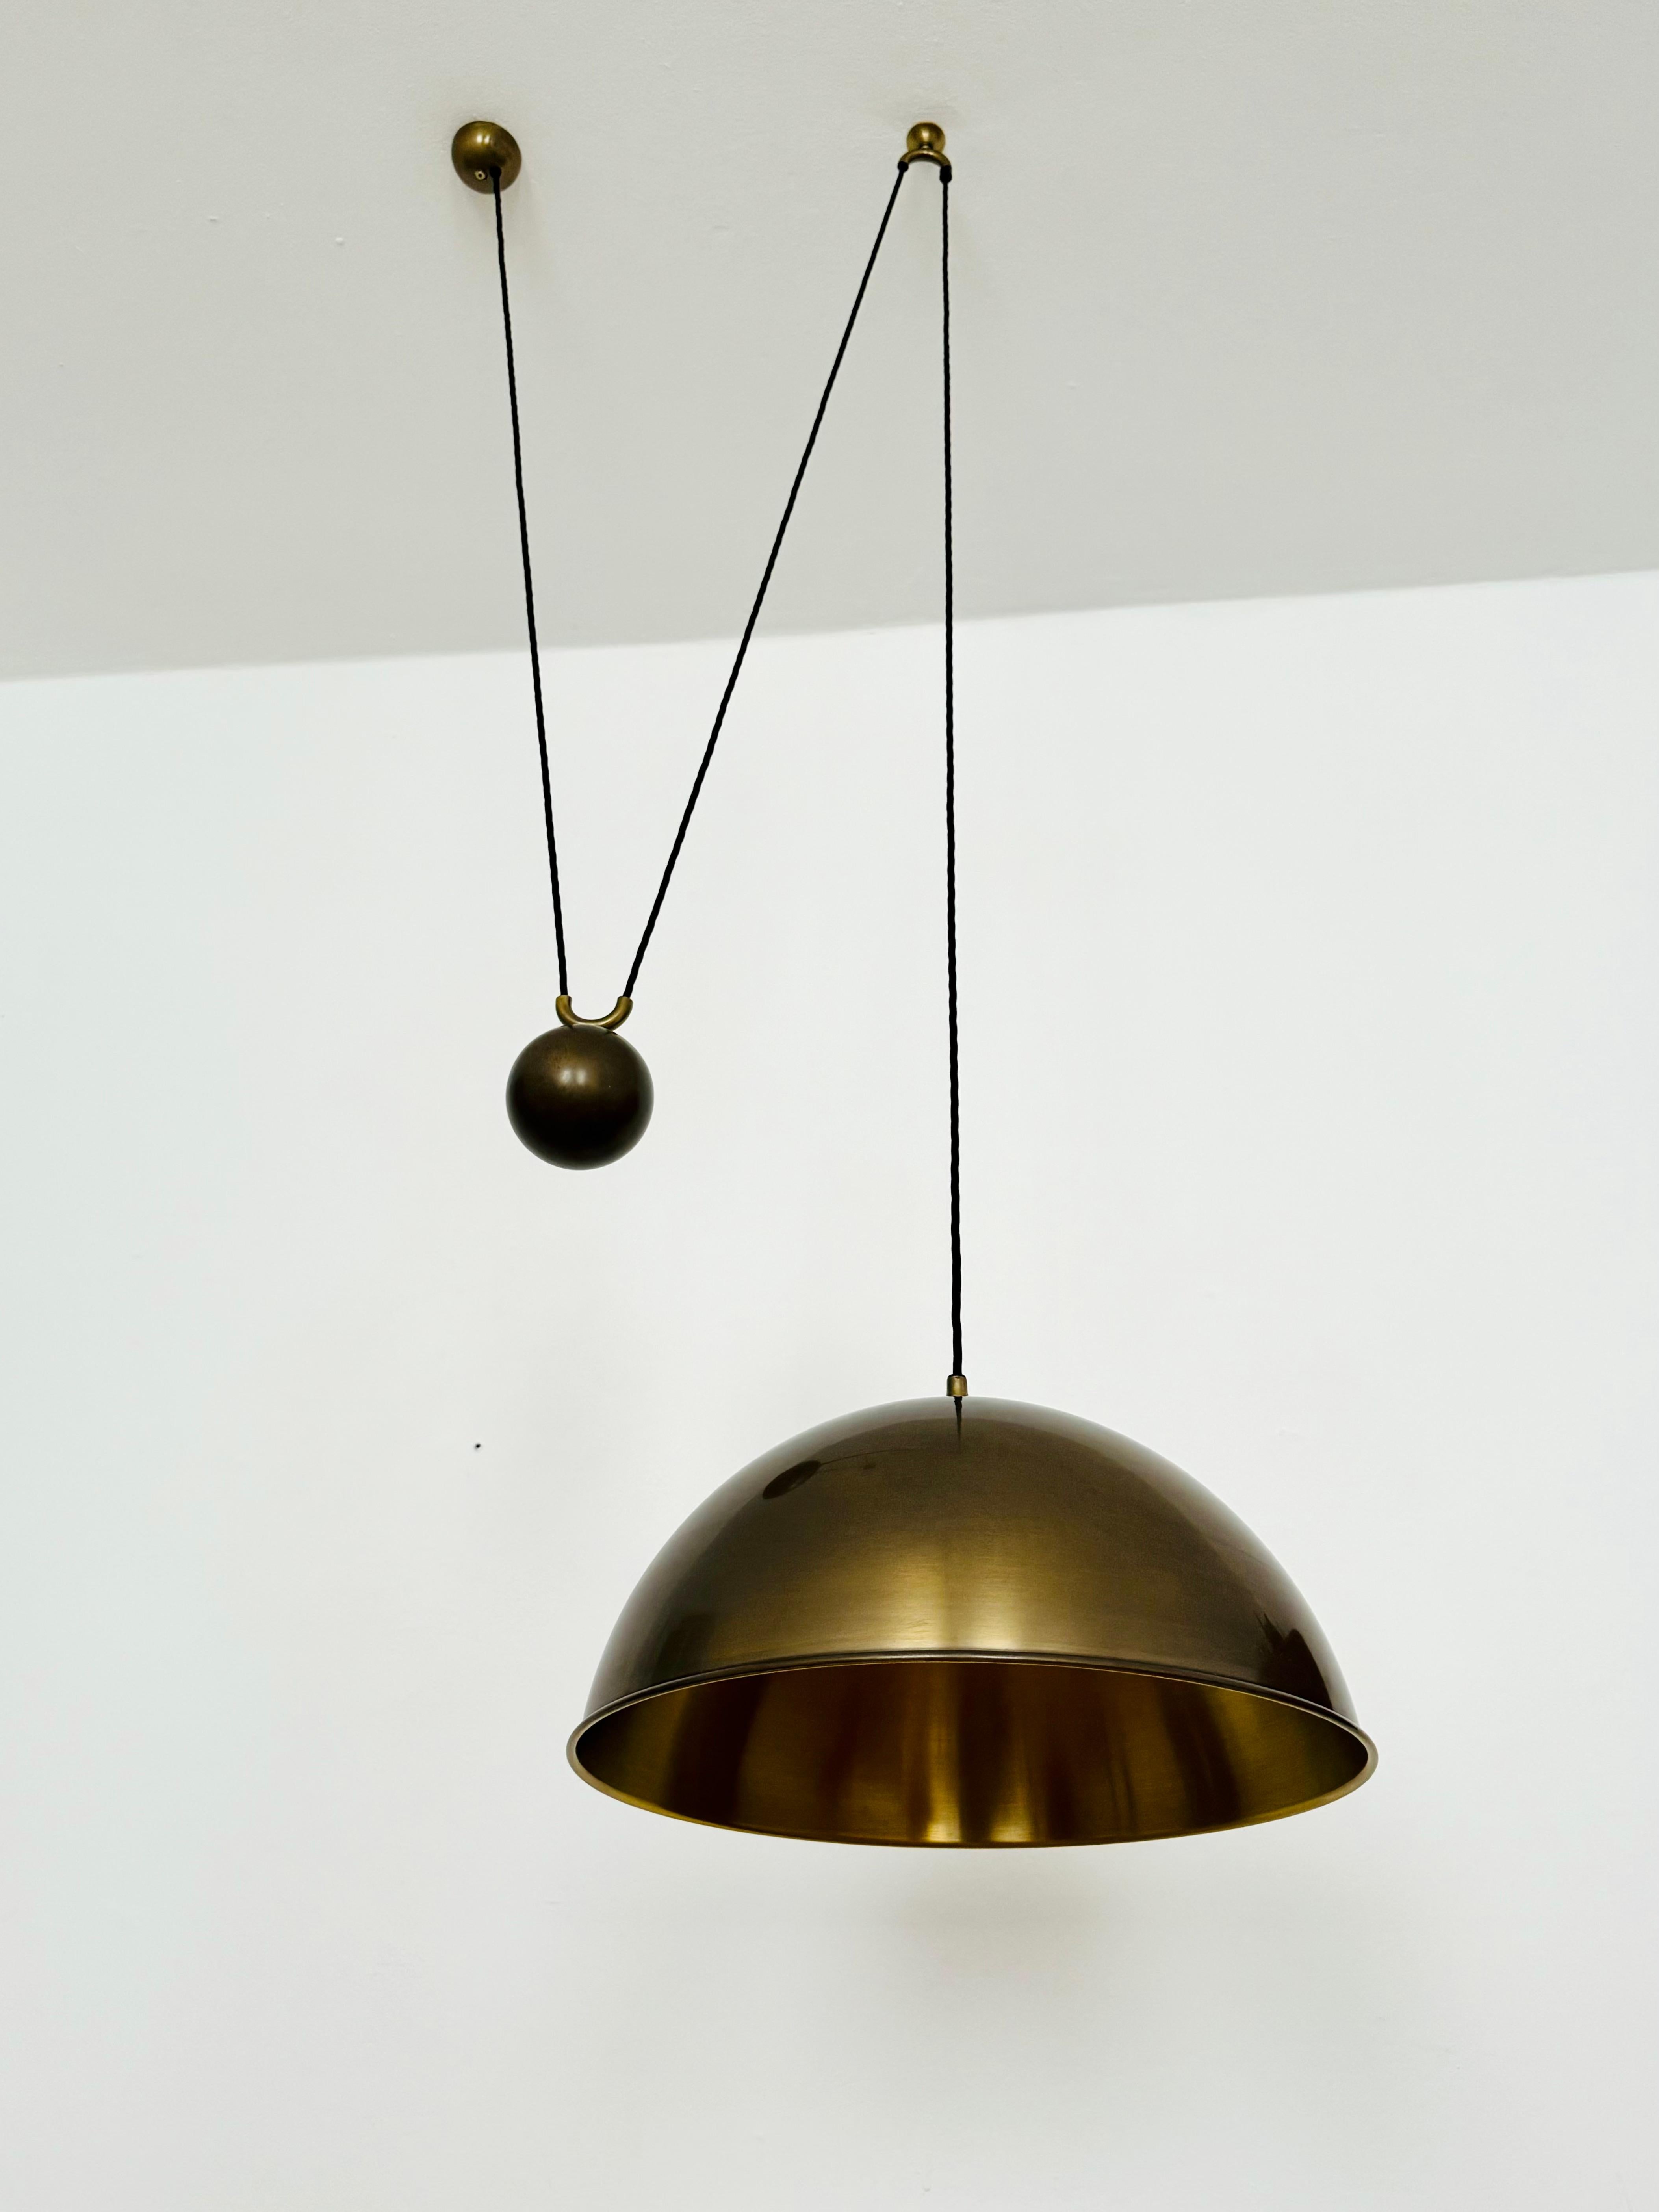 Very nice brass pendant lamp from the 1970s.
The lighting effect of the lamp is extremely beautiful.
The design and the very beautiful details create a very elegant and pleasant light.
The lamp creates a very cozy atmosphere and is very high